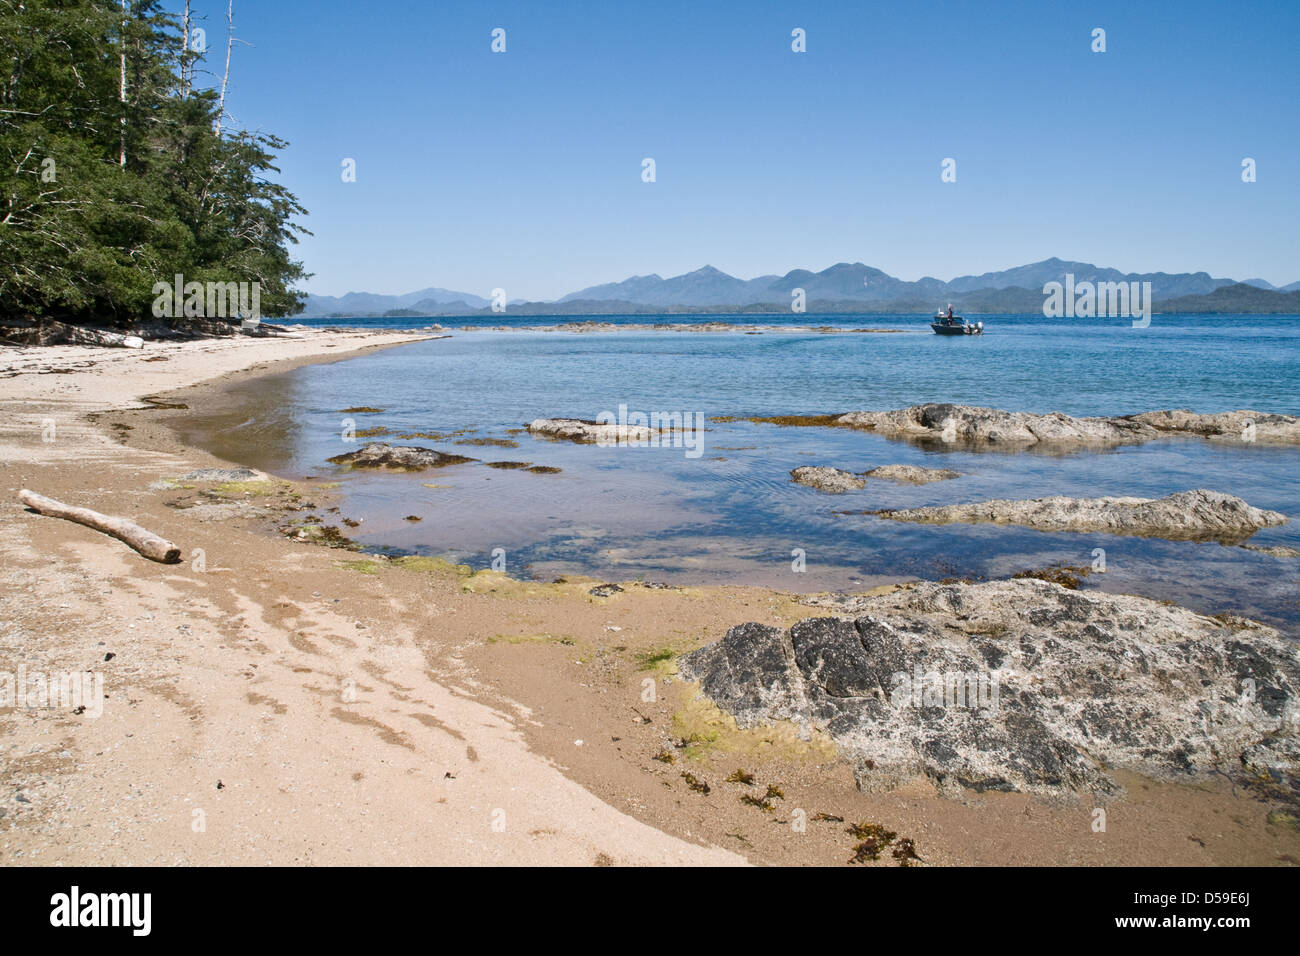 A boat off a sandy beach on the west coast of Swindle Island in the Great Bear Rainforest, British Columbia, Canada. Stock Photo